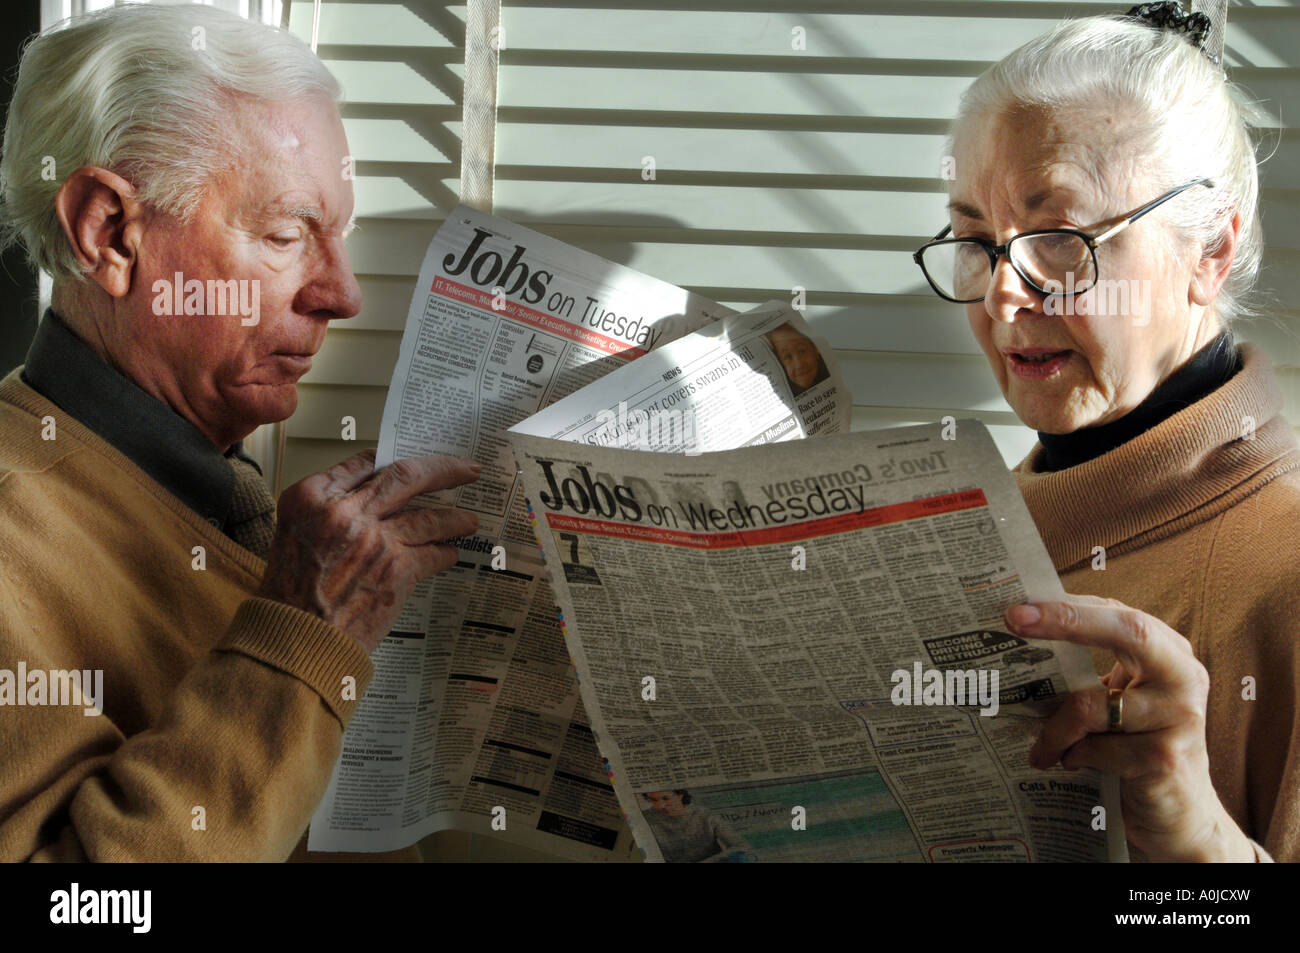 Two pensioners, a man and a woman, look at job ads in a paper, trying to find jobs to suppliment tiny pension payments. Stock Photo